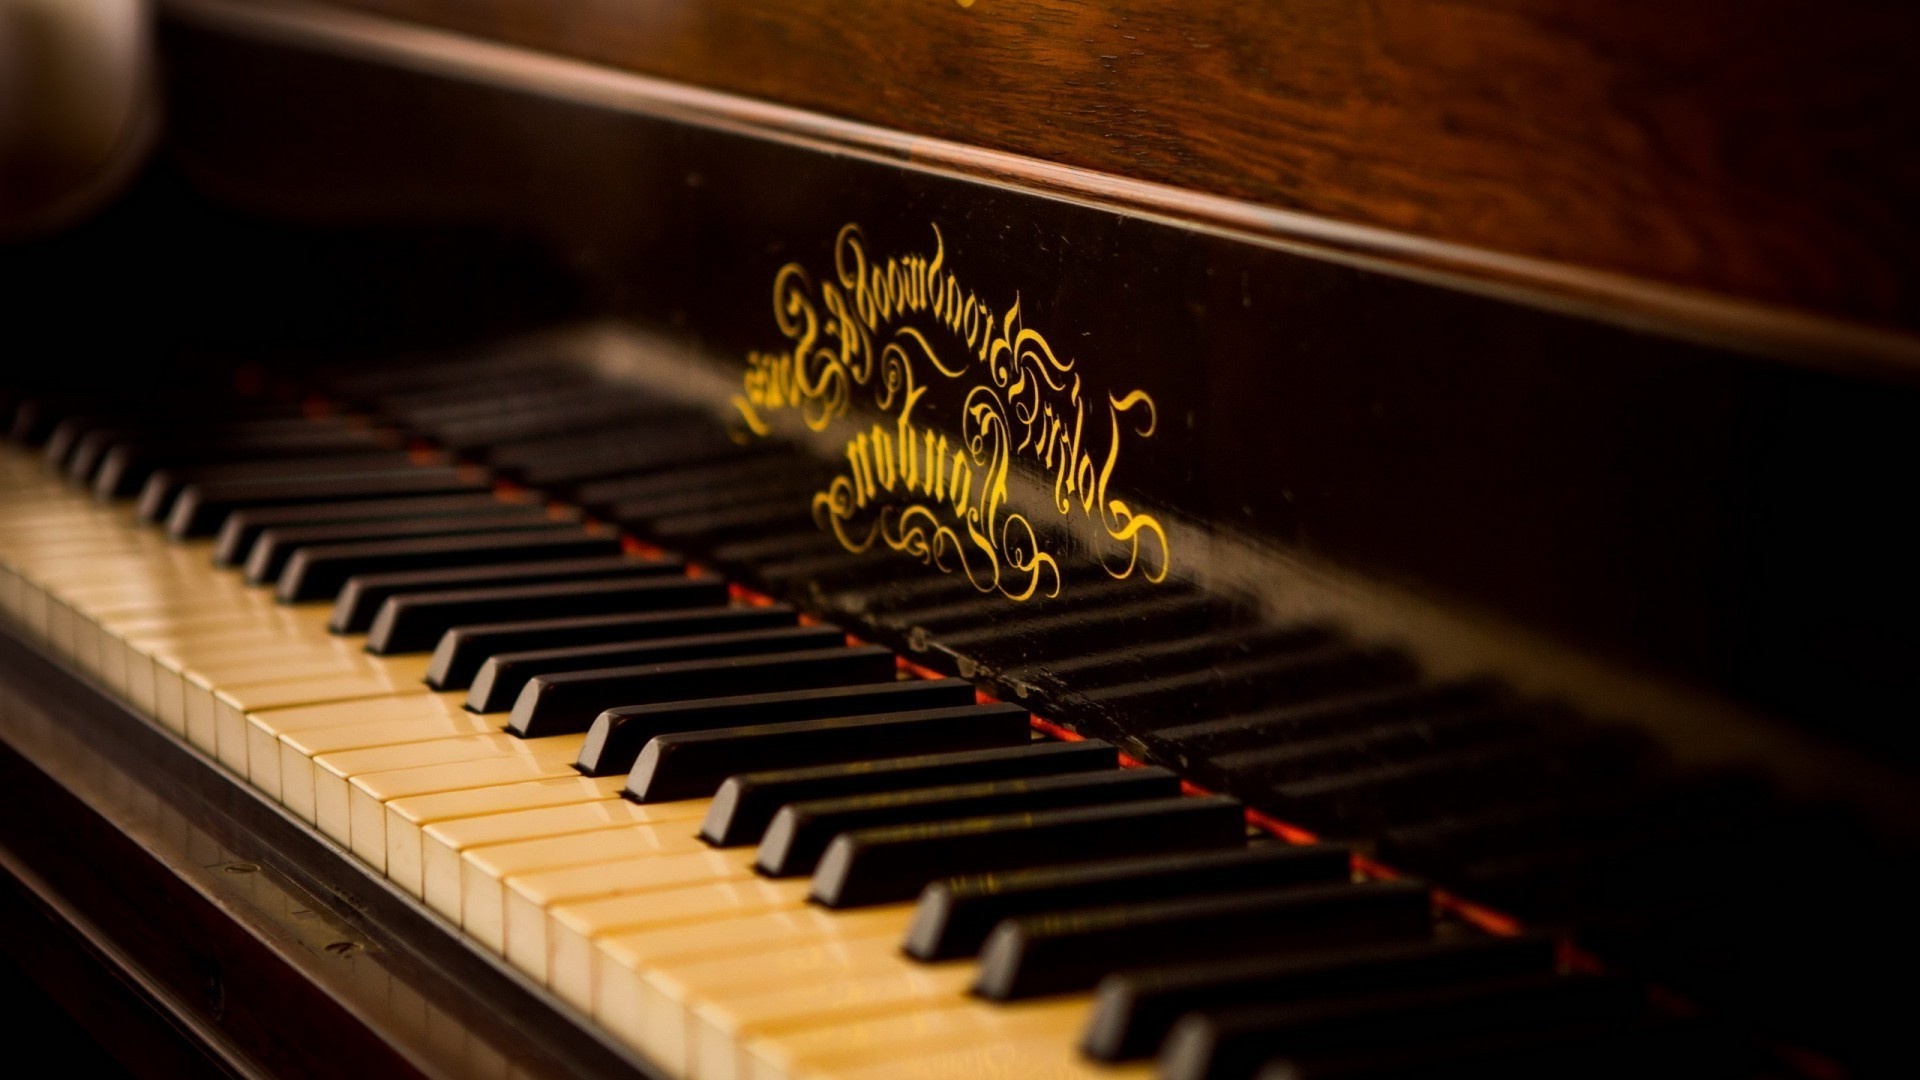 Fortepiano: Musical Keyboard, Musical Instrument, The Seven "Natural" Notes. 1920x1080 Full HD Wallpaper.